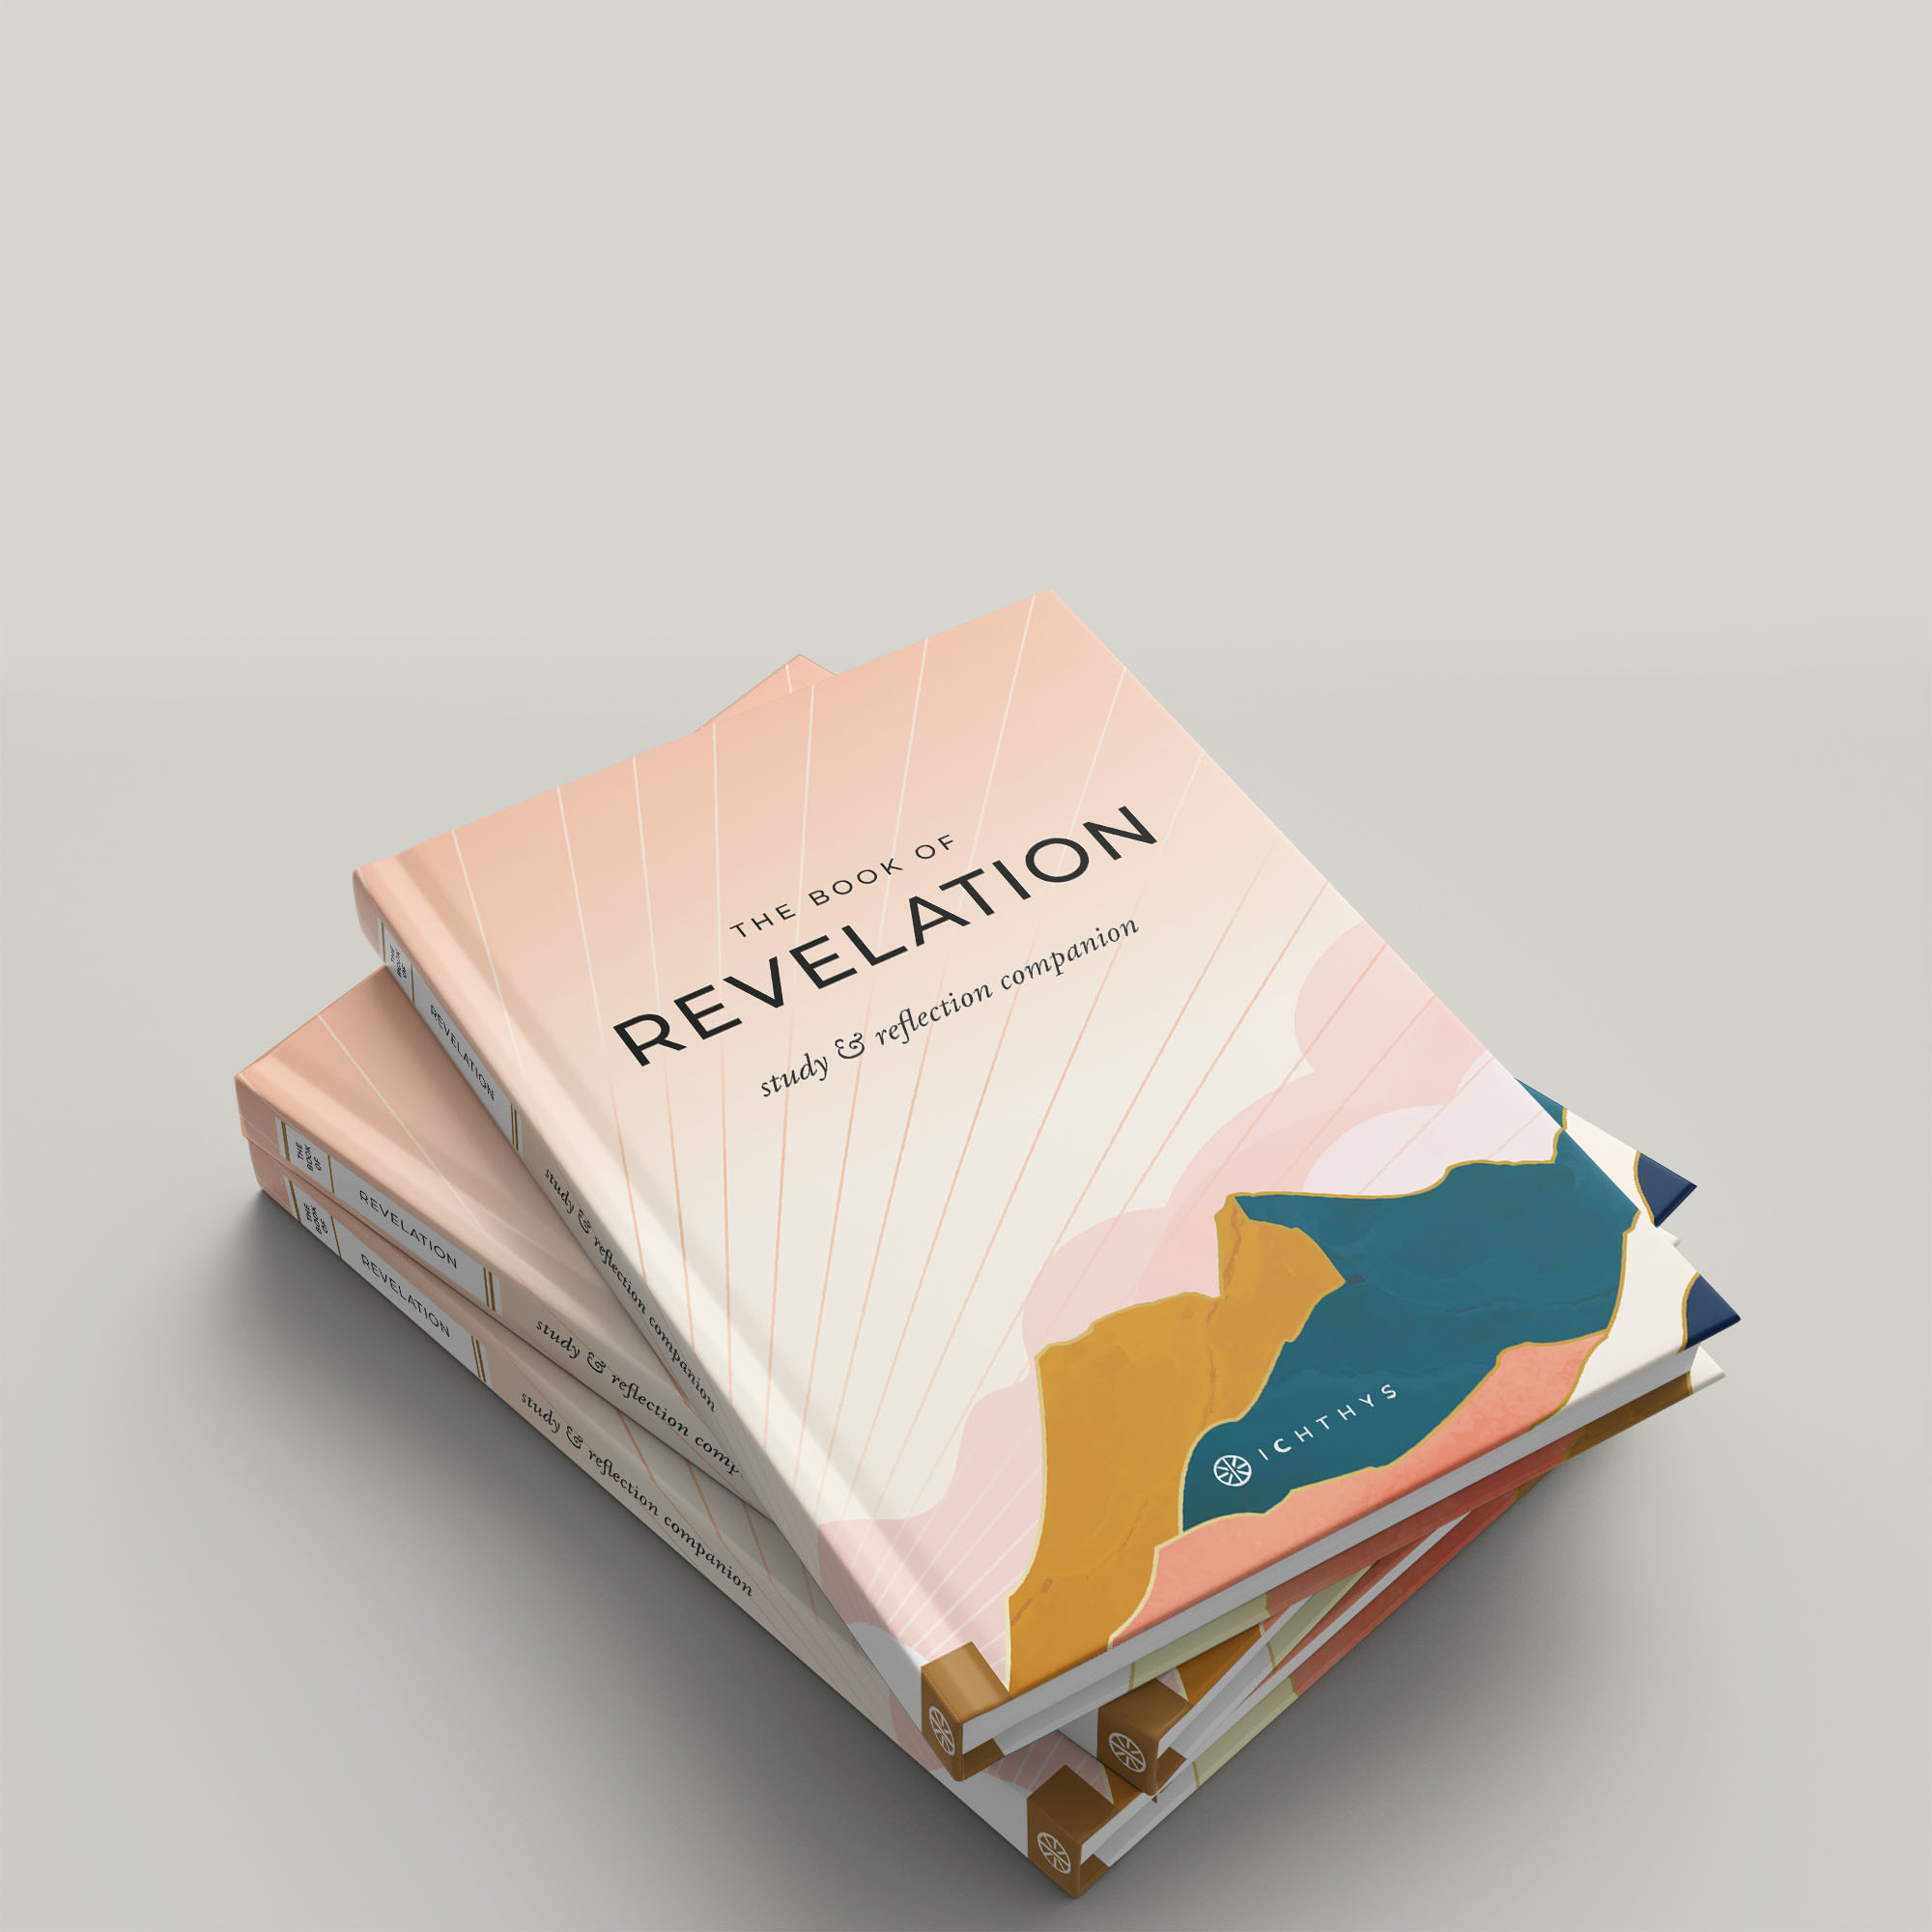 The Book of Revelation by ICHTHYS Press